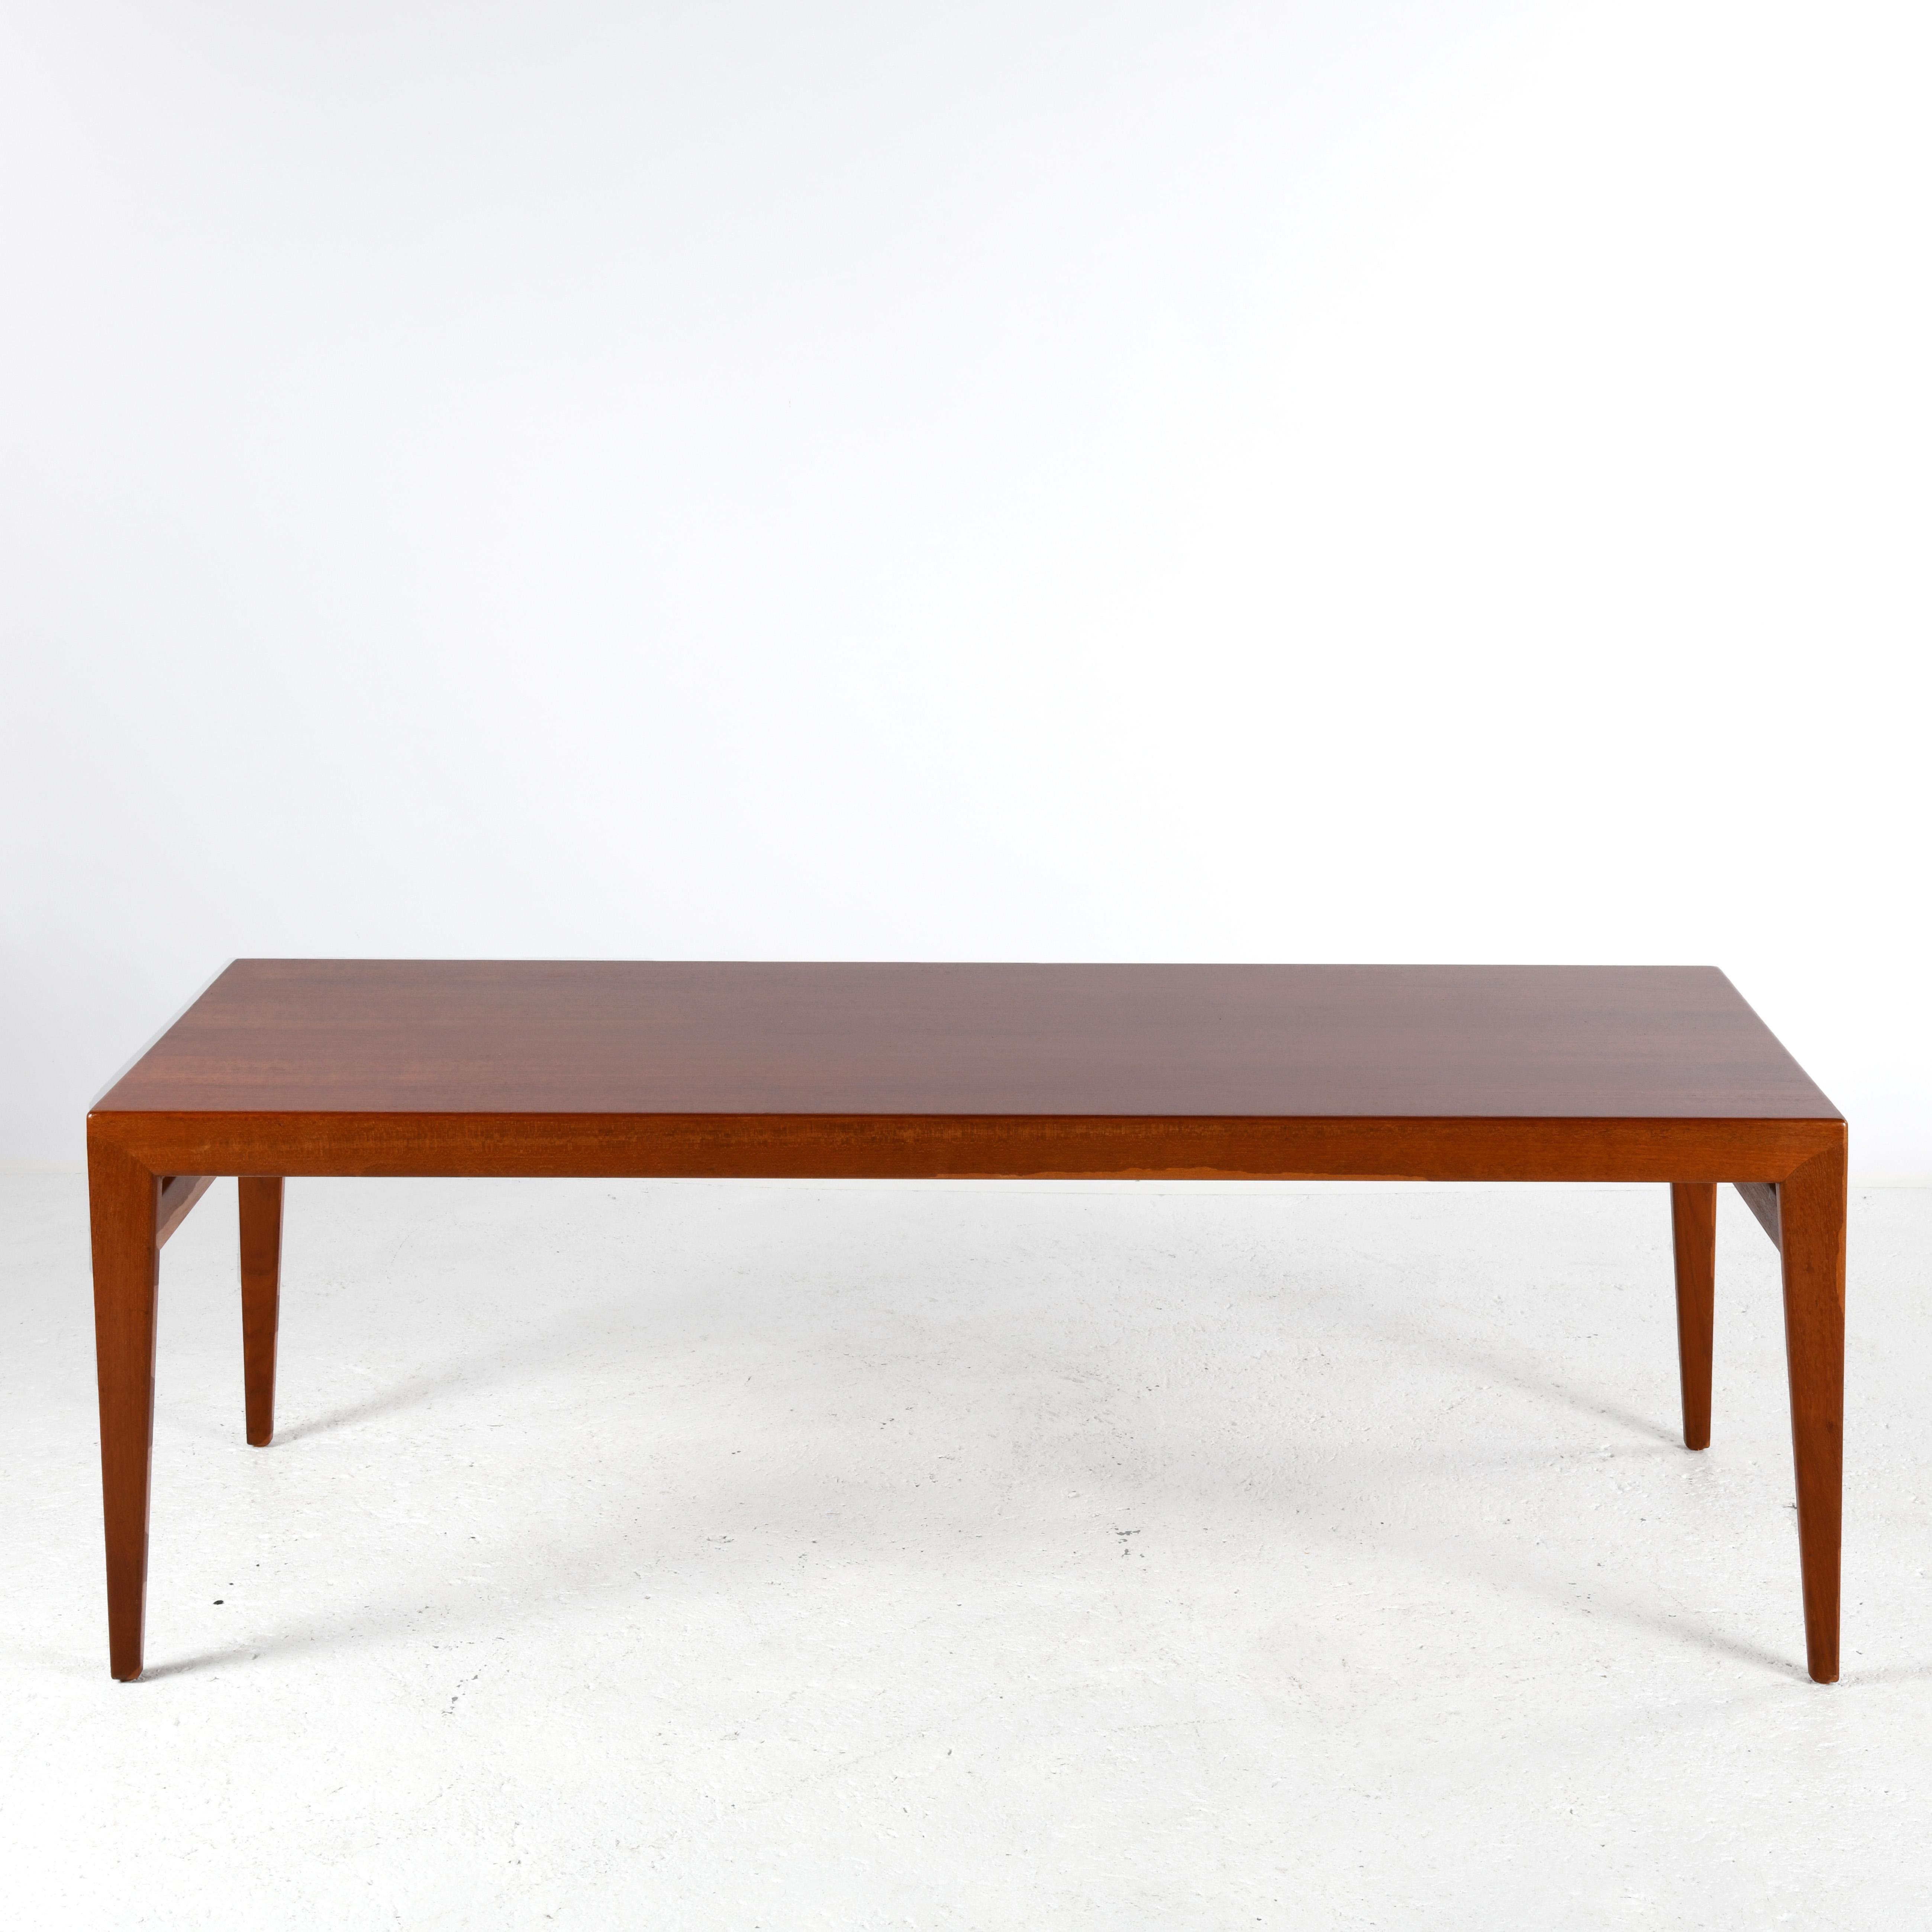 Vintage teak coffee table by Johannes Andersen with two extendible shelves 1